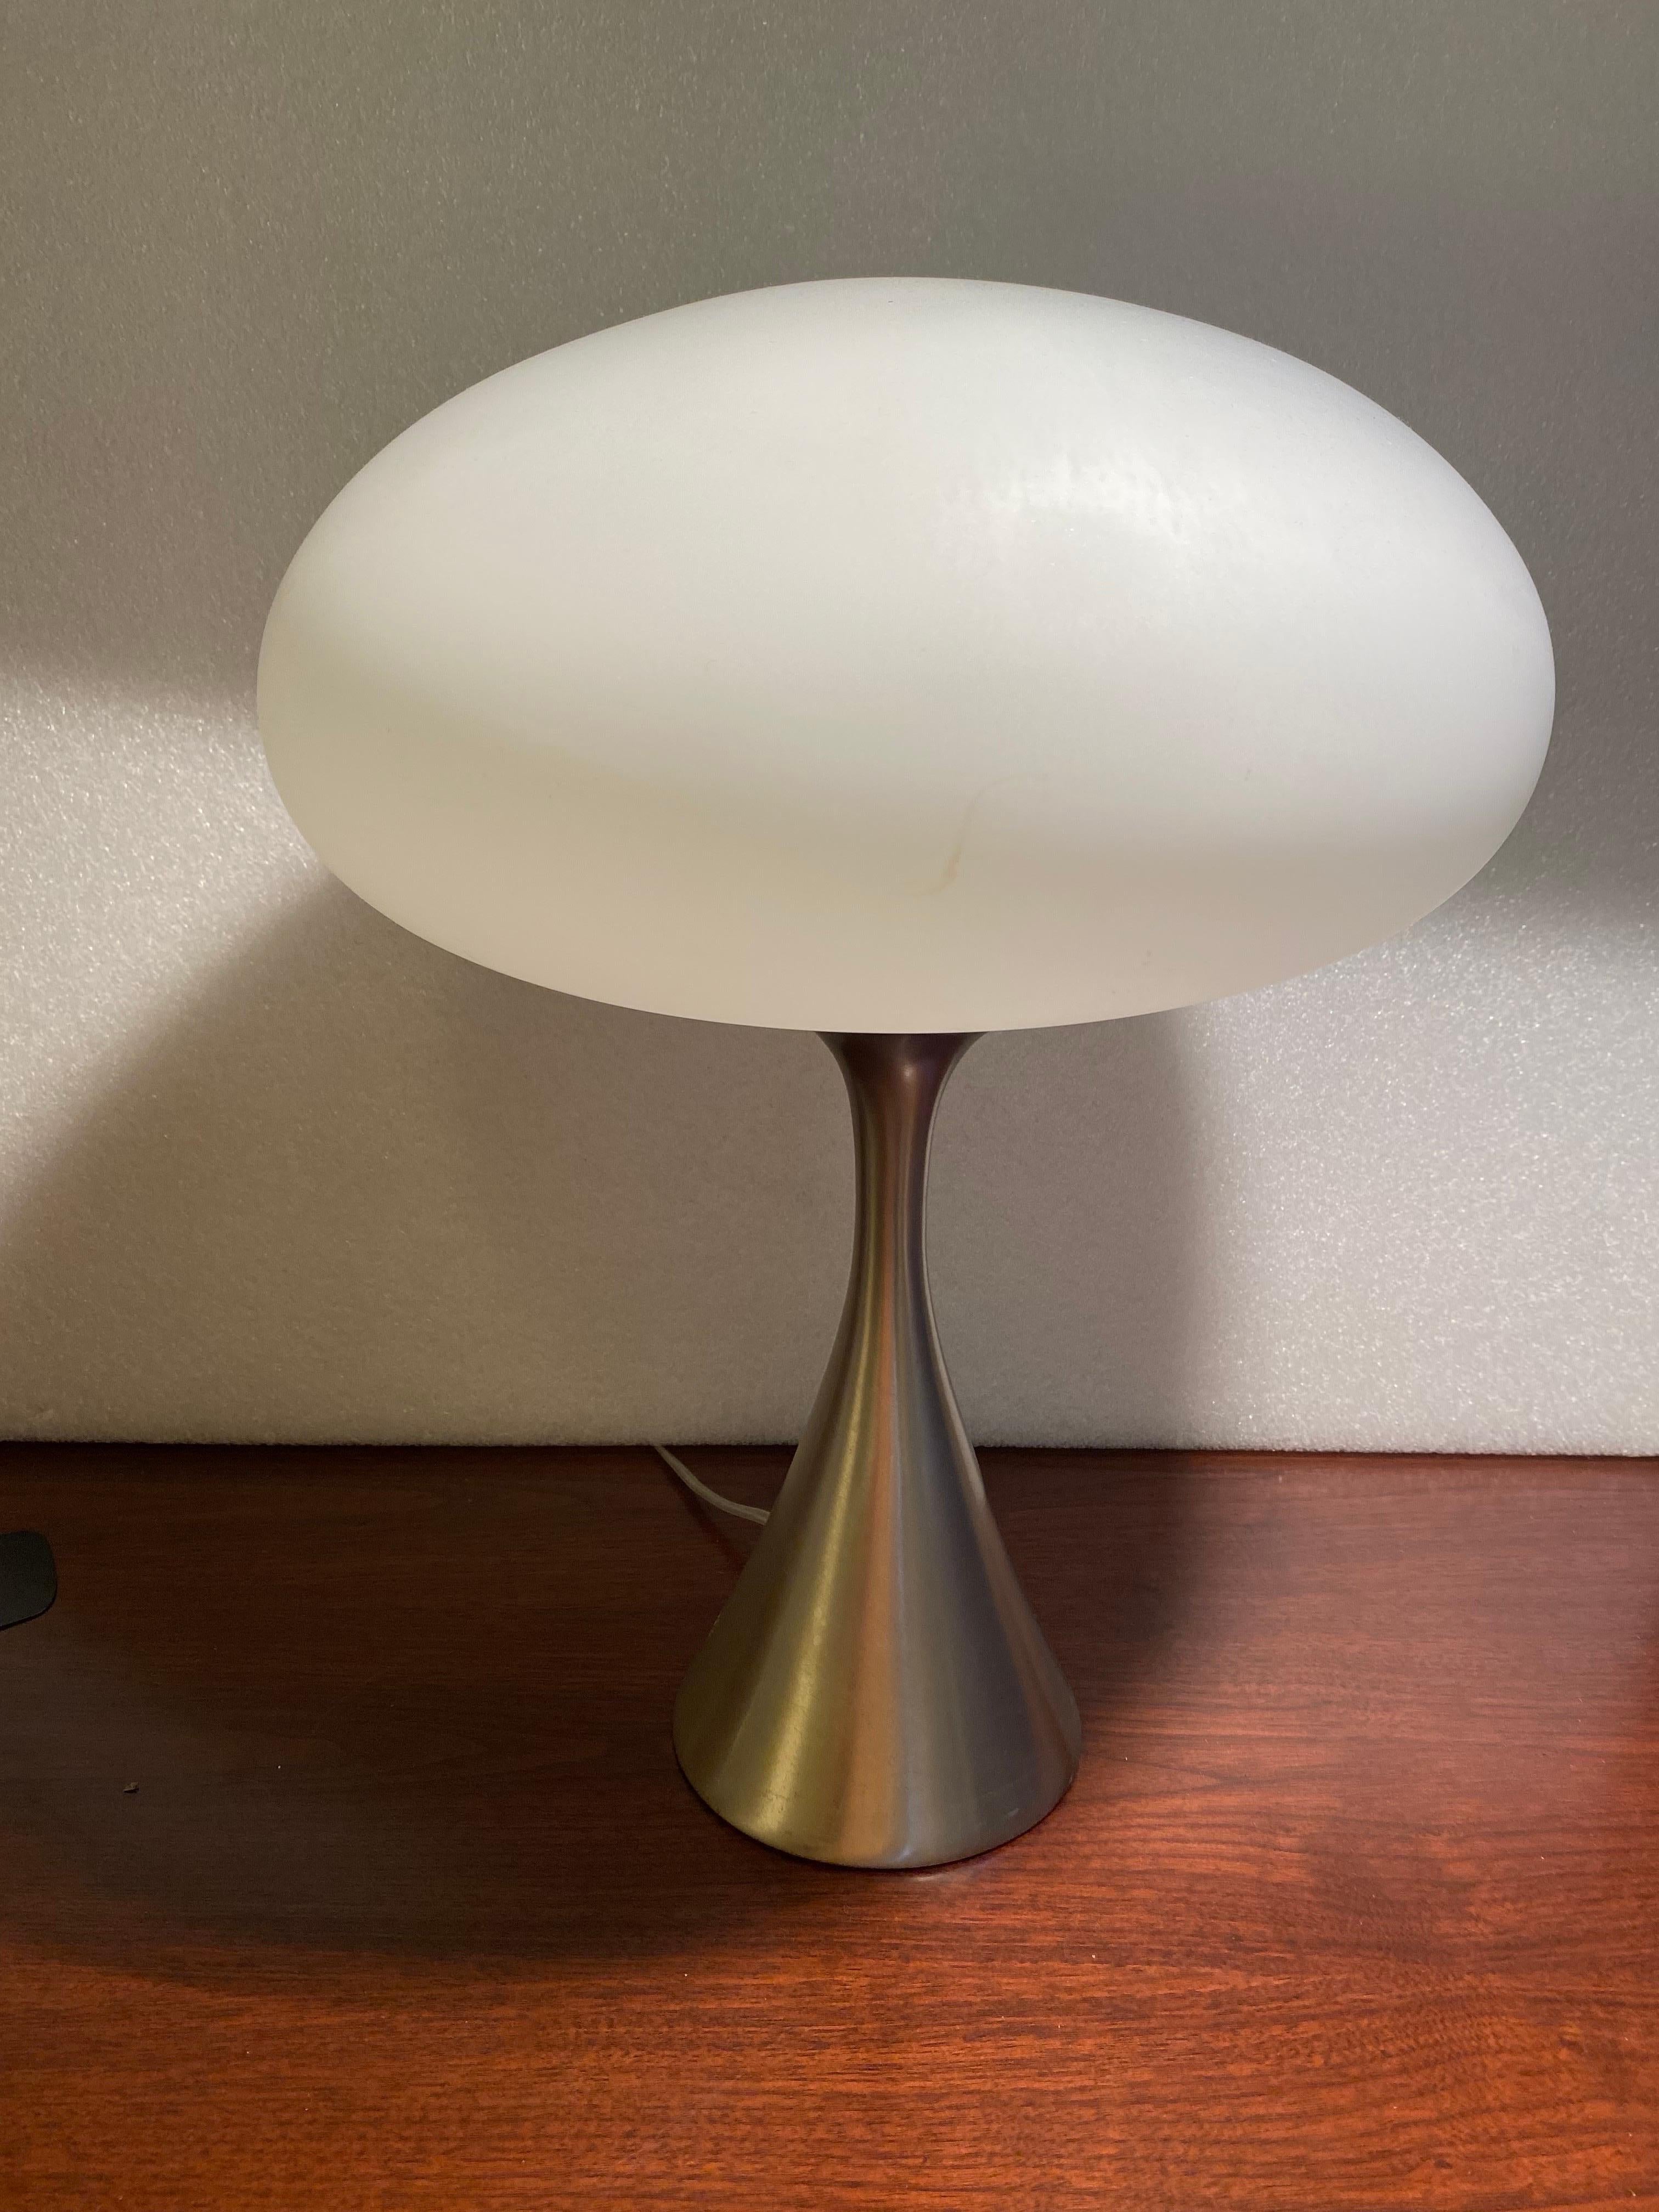 Original Laurel Mushroom Satin Chrome finish Table lamp.  Base retains its original label and shade still has partial glue spot where the label was attached.  This finish is harder to find than the painted ones!  I have a matching floor lamp with a